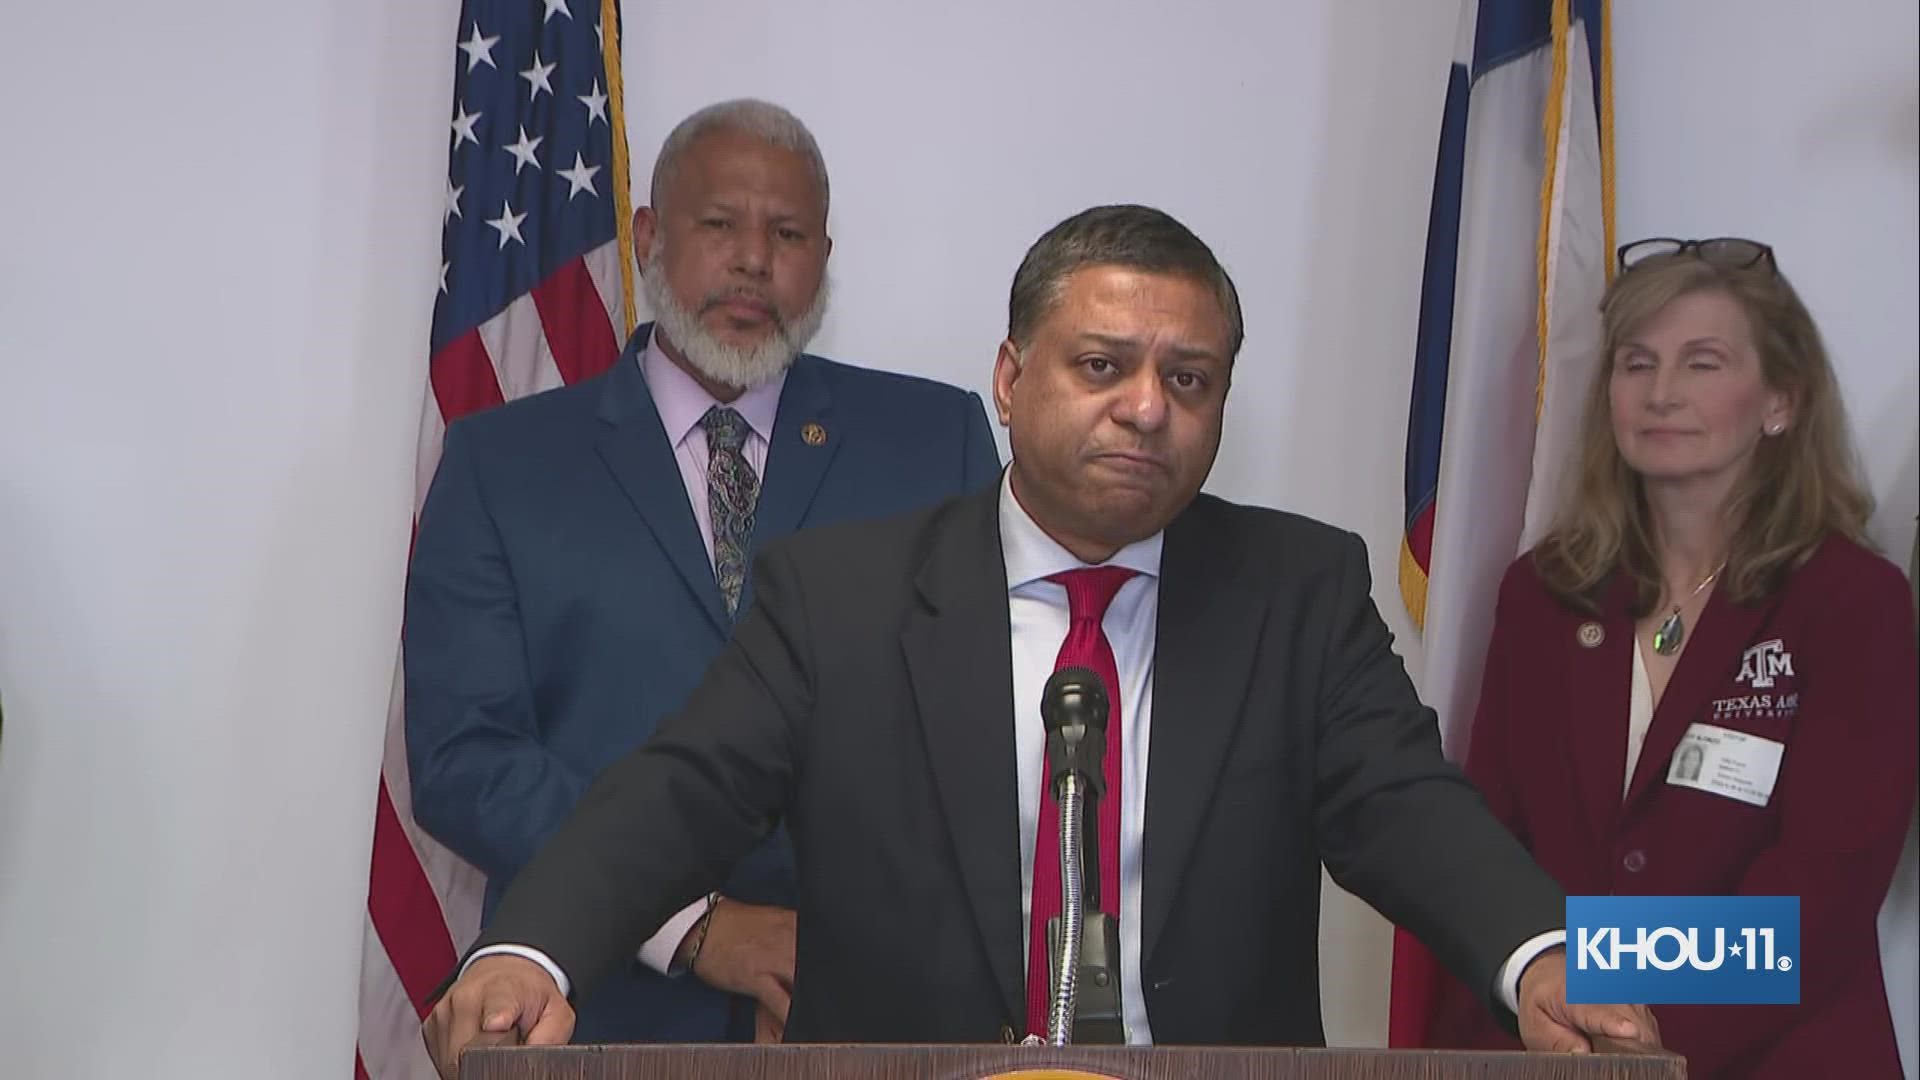 Dr. Rahul Gupta, the director of the White House Office of National Drug Control Policy, announces increased funding in fight against overdose epidemic.